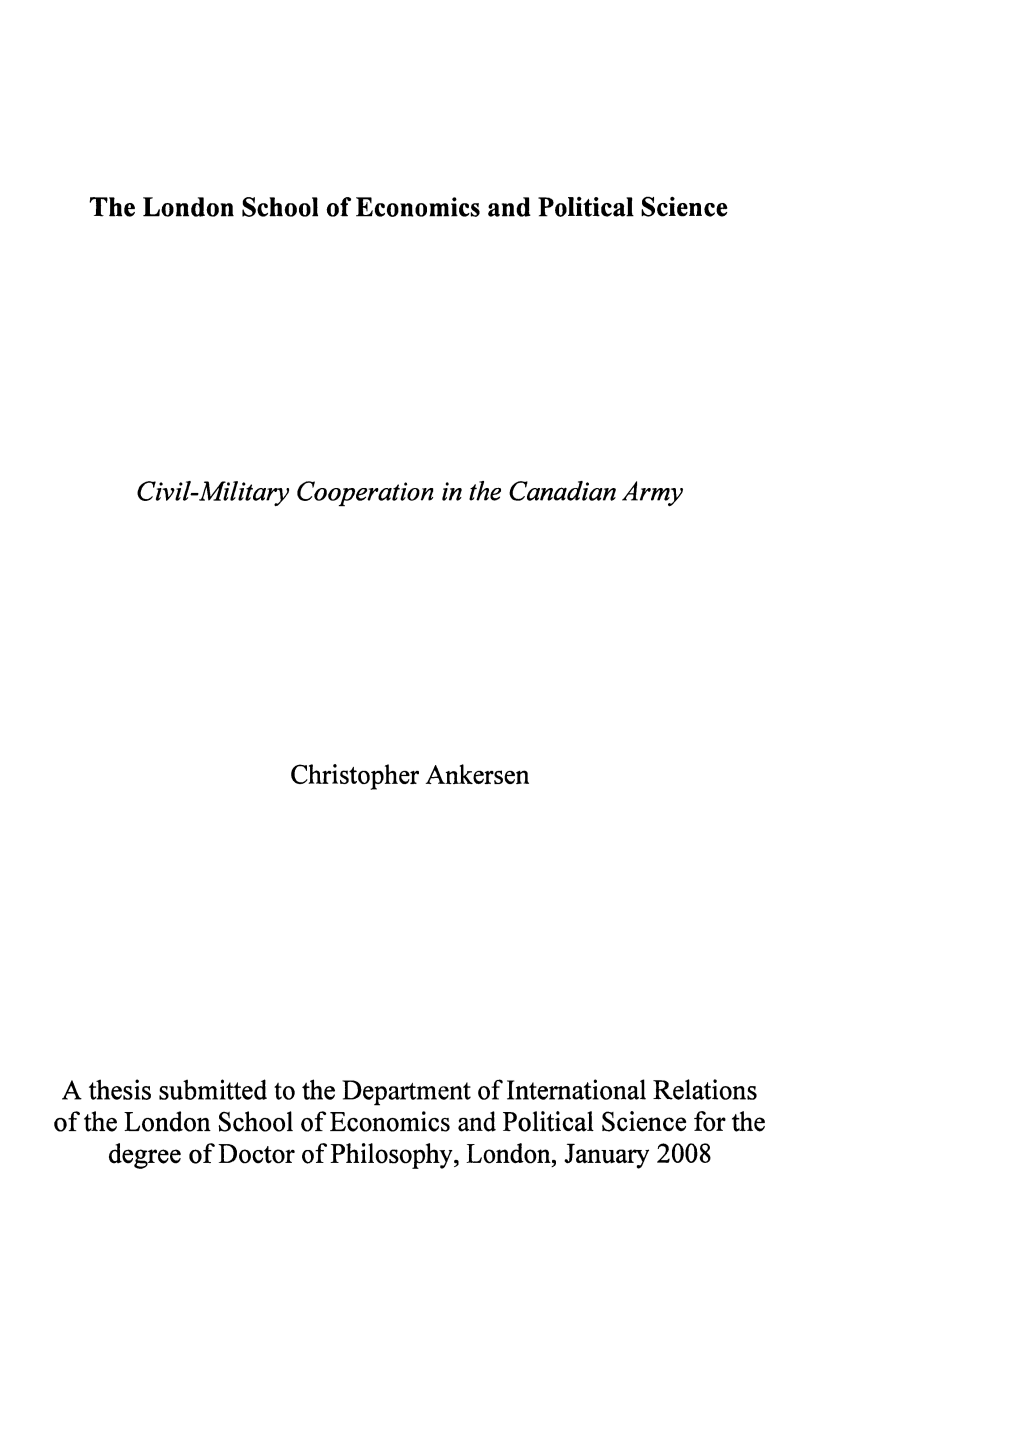 The London School of Economics and Political Science Christopher Ankersen a Thesis Submitted to the Department of International